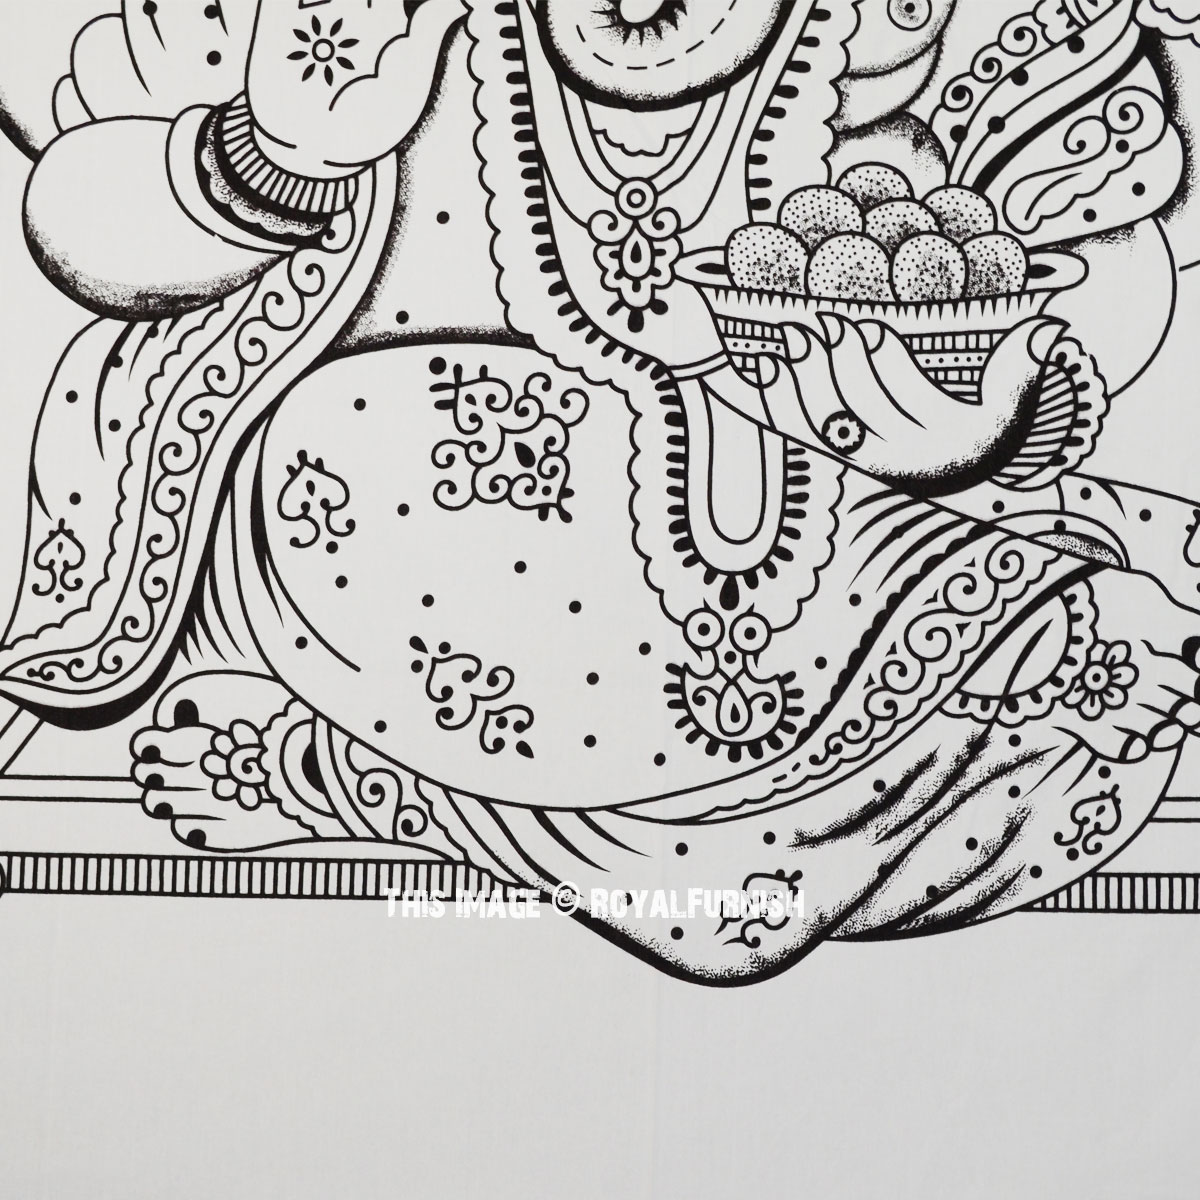 Tapestry Black & White Home Decorations Poster Lord Ganesha Wall Hanging Poster 